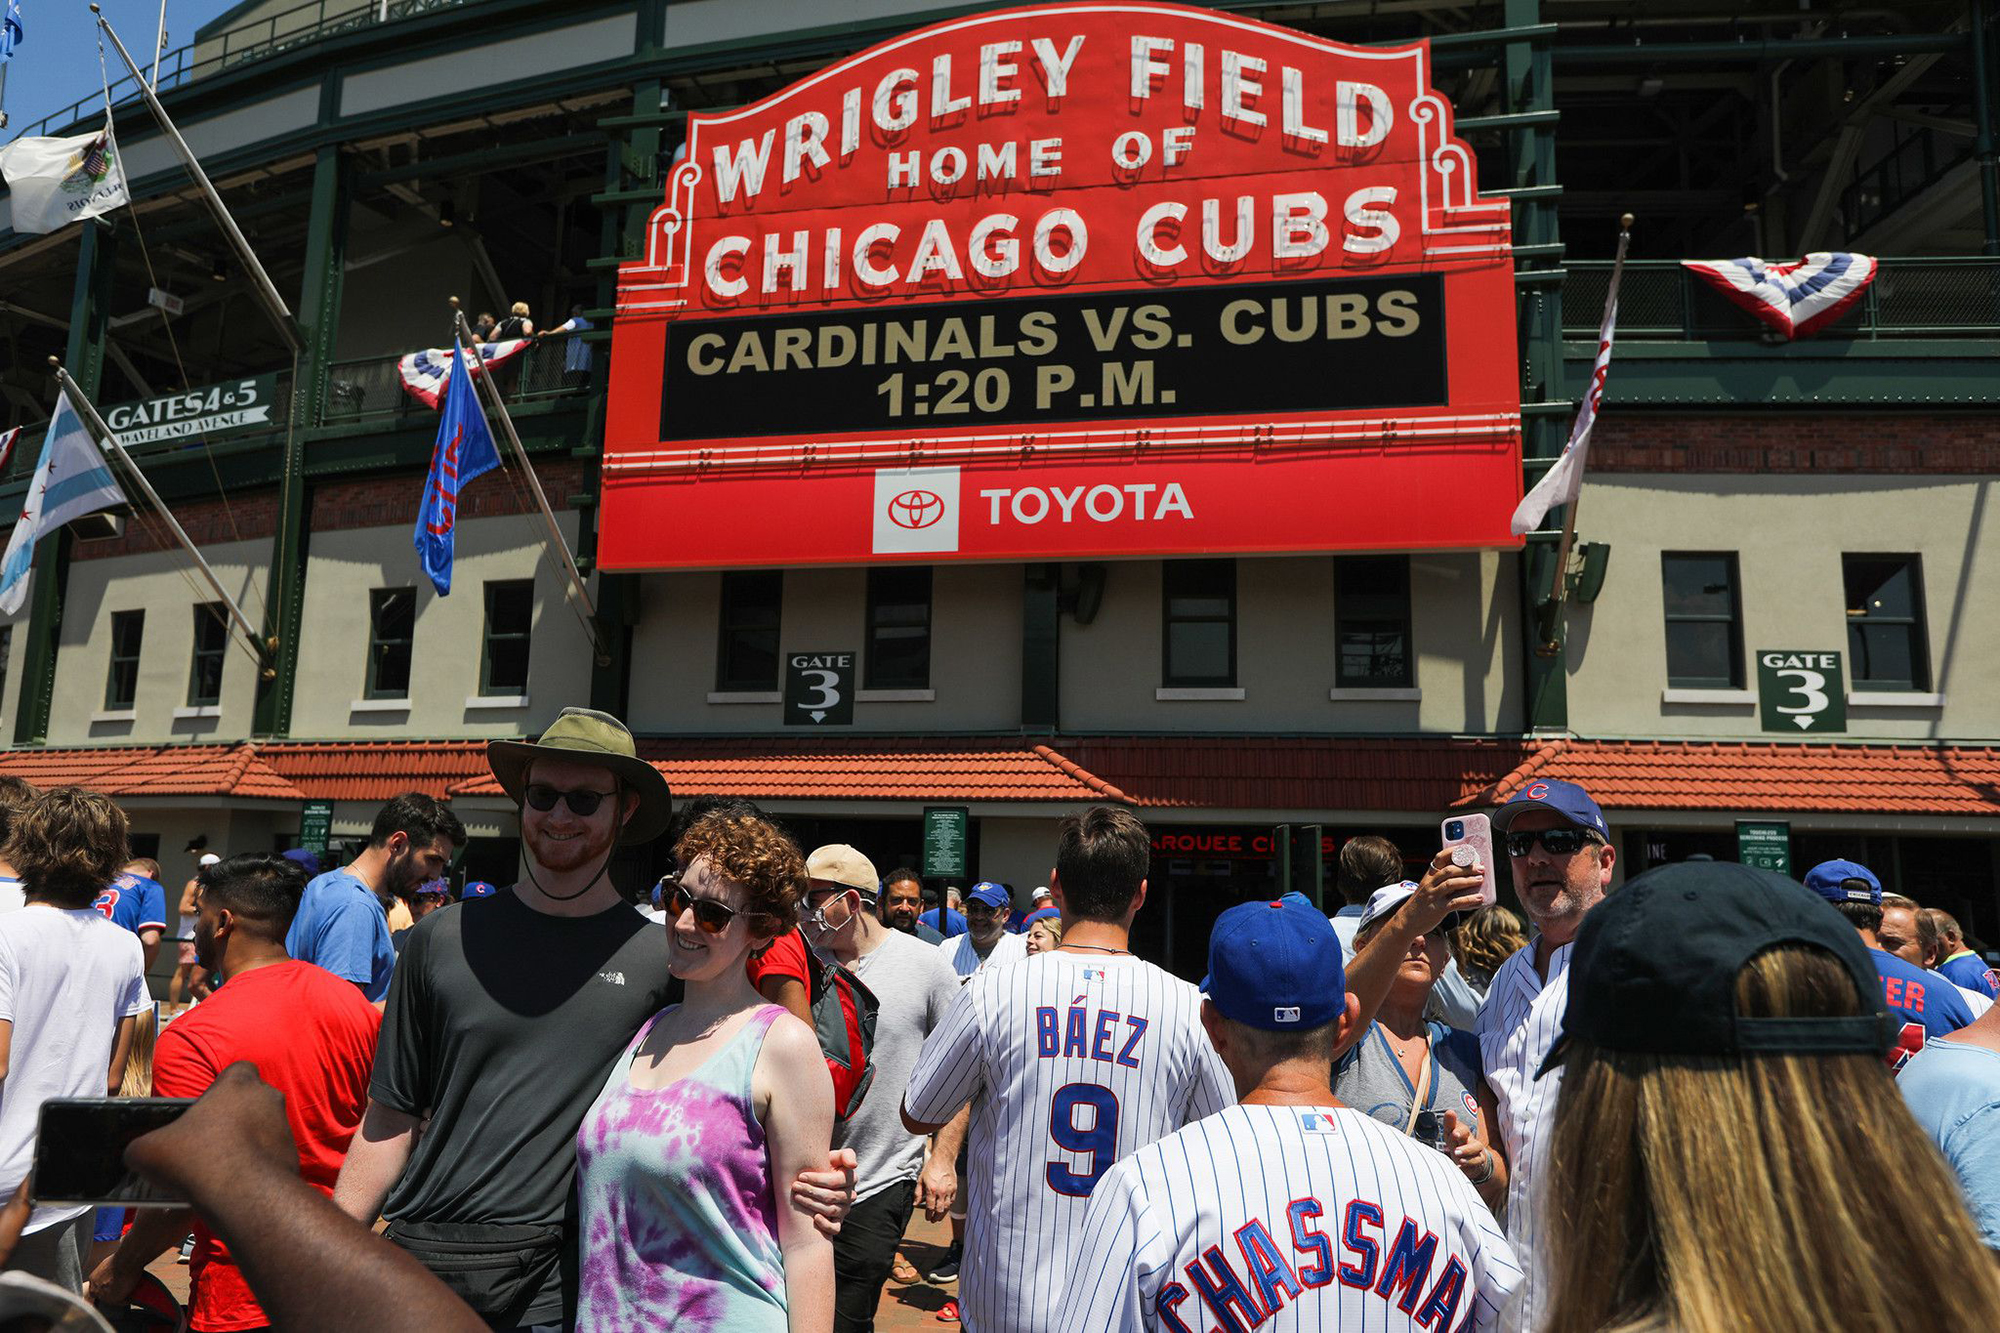 Fans walk toward the main entrance of a ballpark in Chicago with a big red sign.